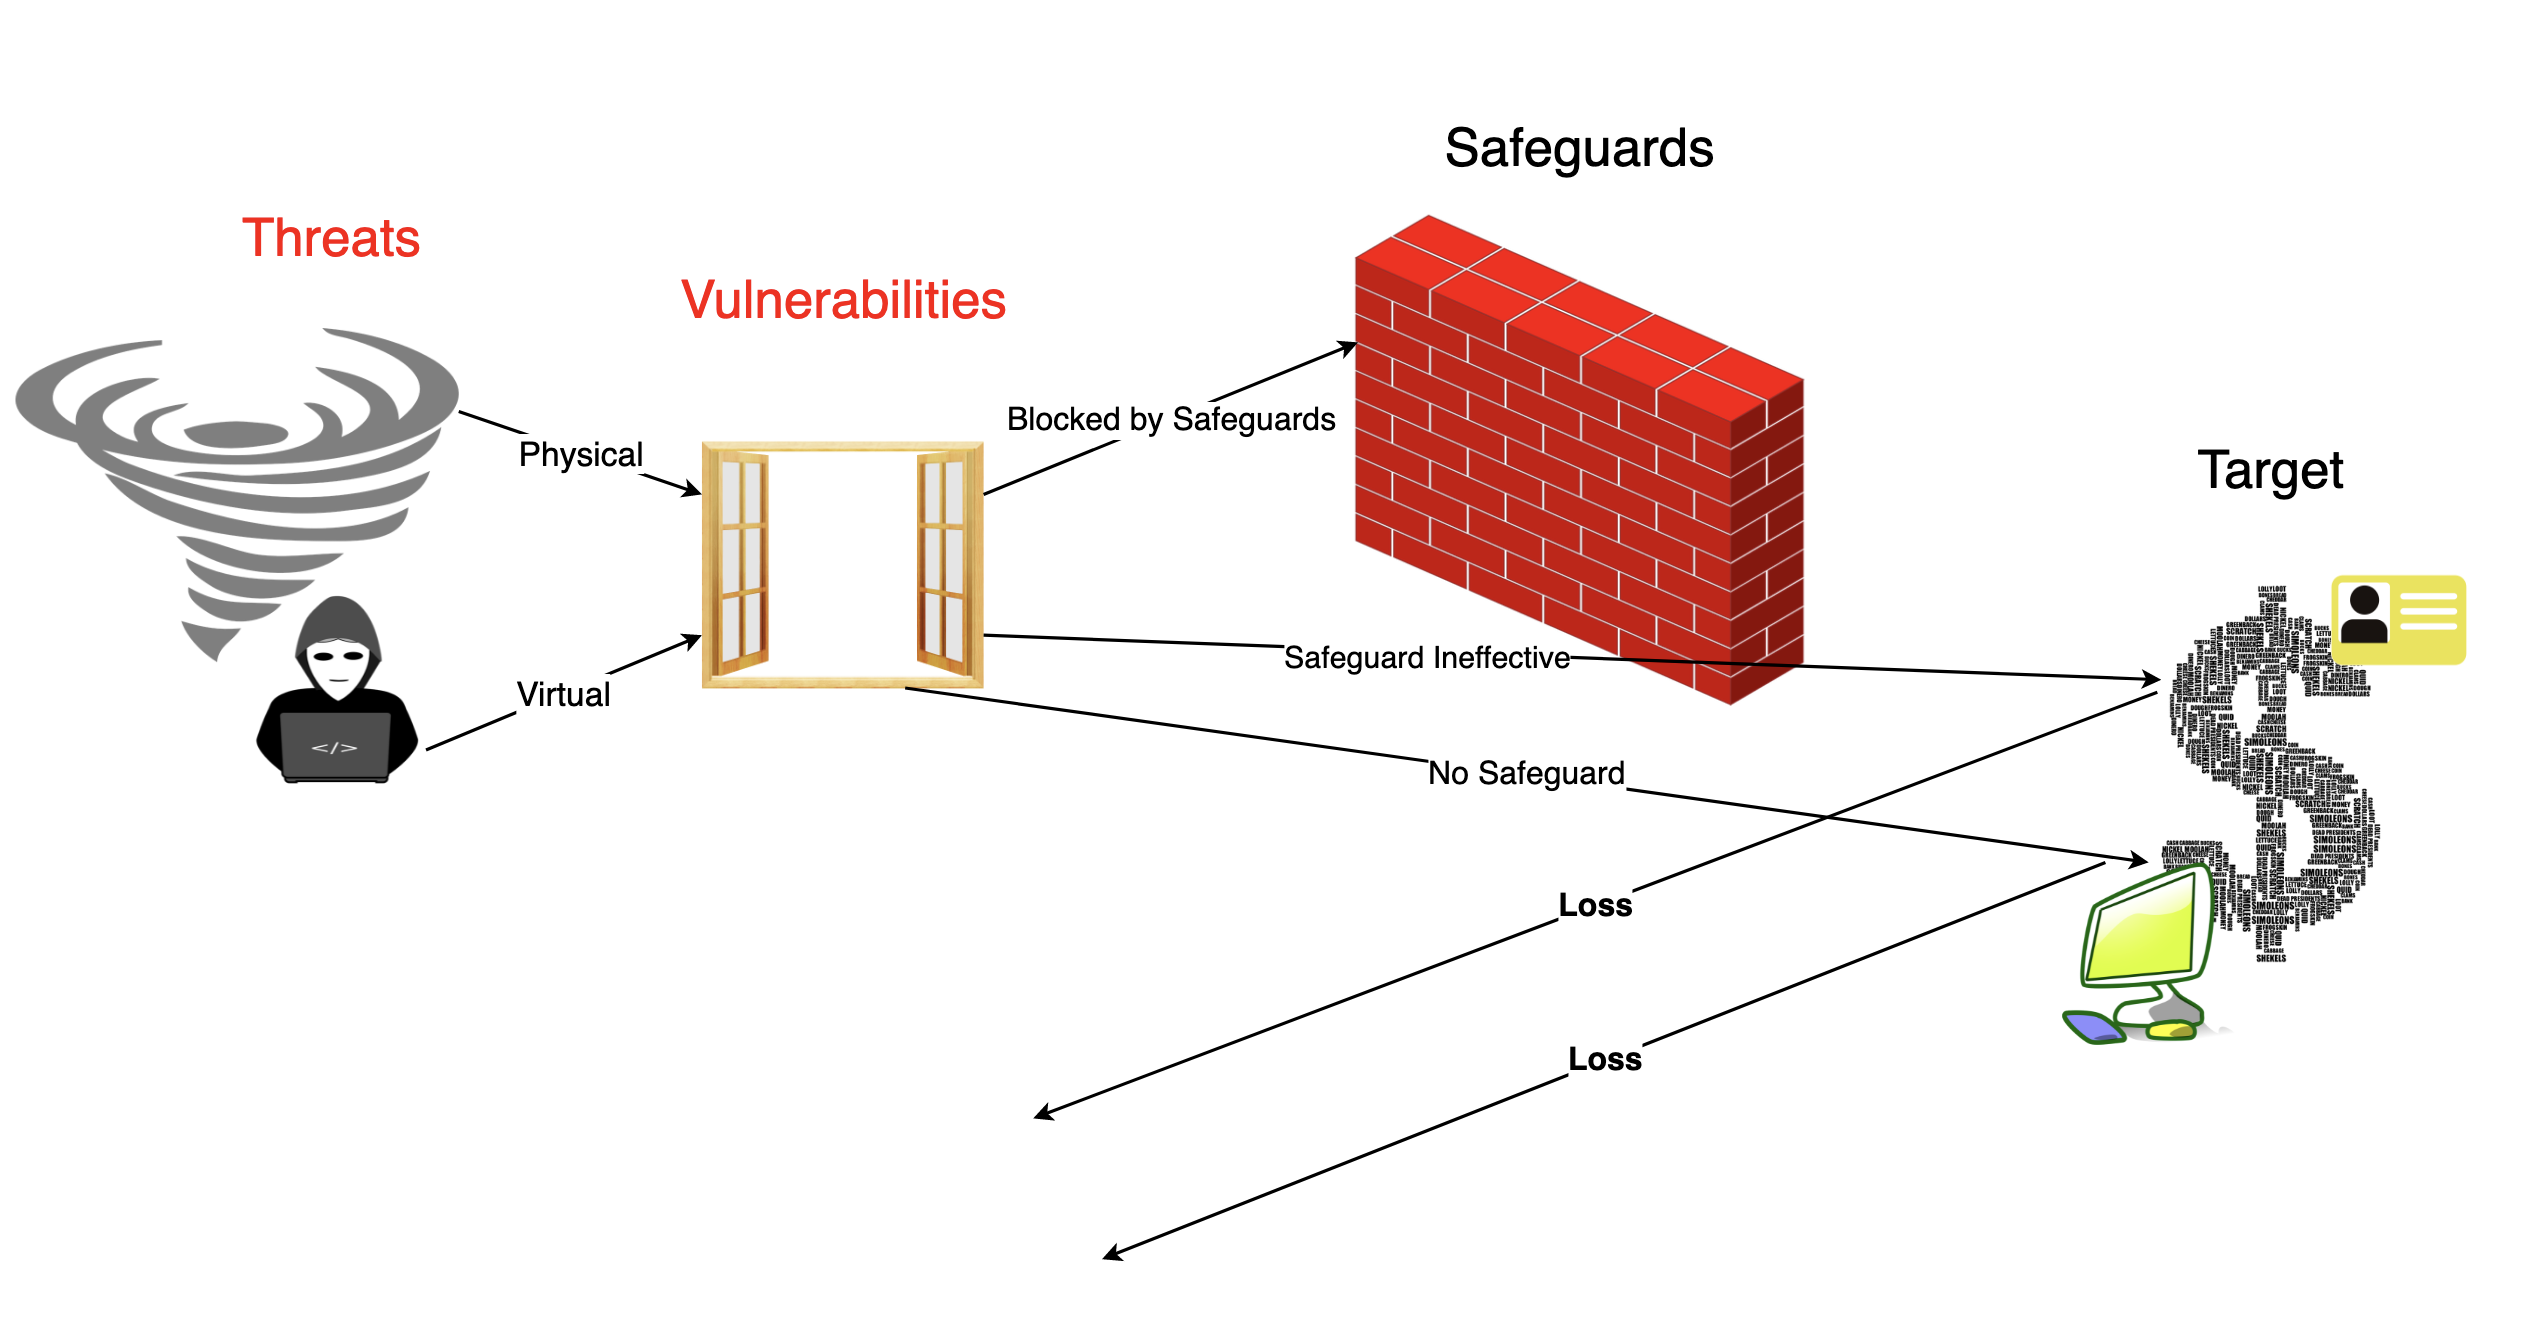 A clip art diagram demonstrating physical and digital threats to a network. Threats utilize vulnerabilities to reach their target (personal information, banking information, etc). The diagram references a safeguard as protection against some of the possible threats.